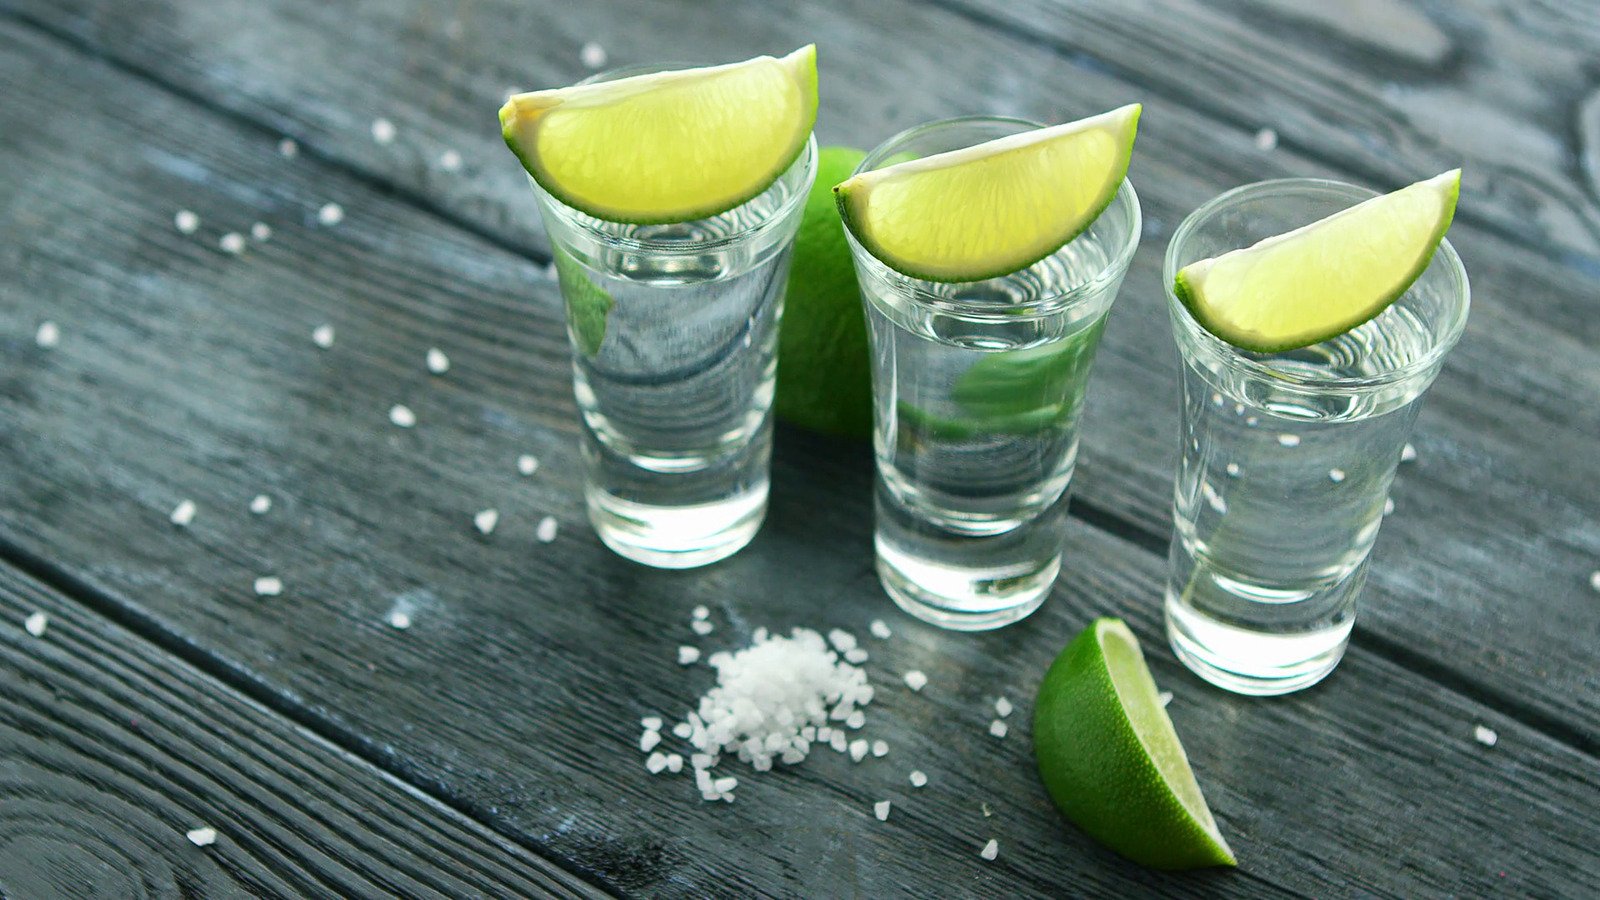 Store Bought Tequila Brands Ranked Worst To Best